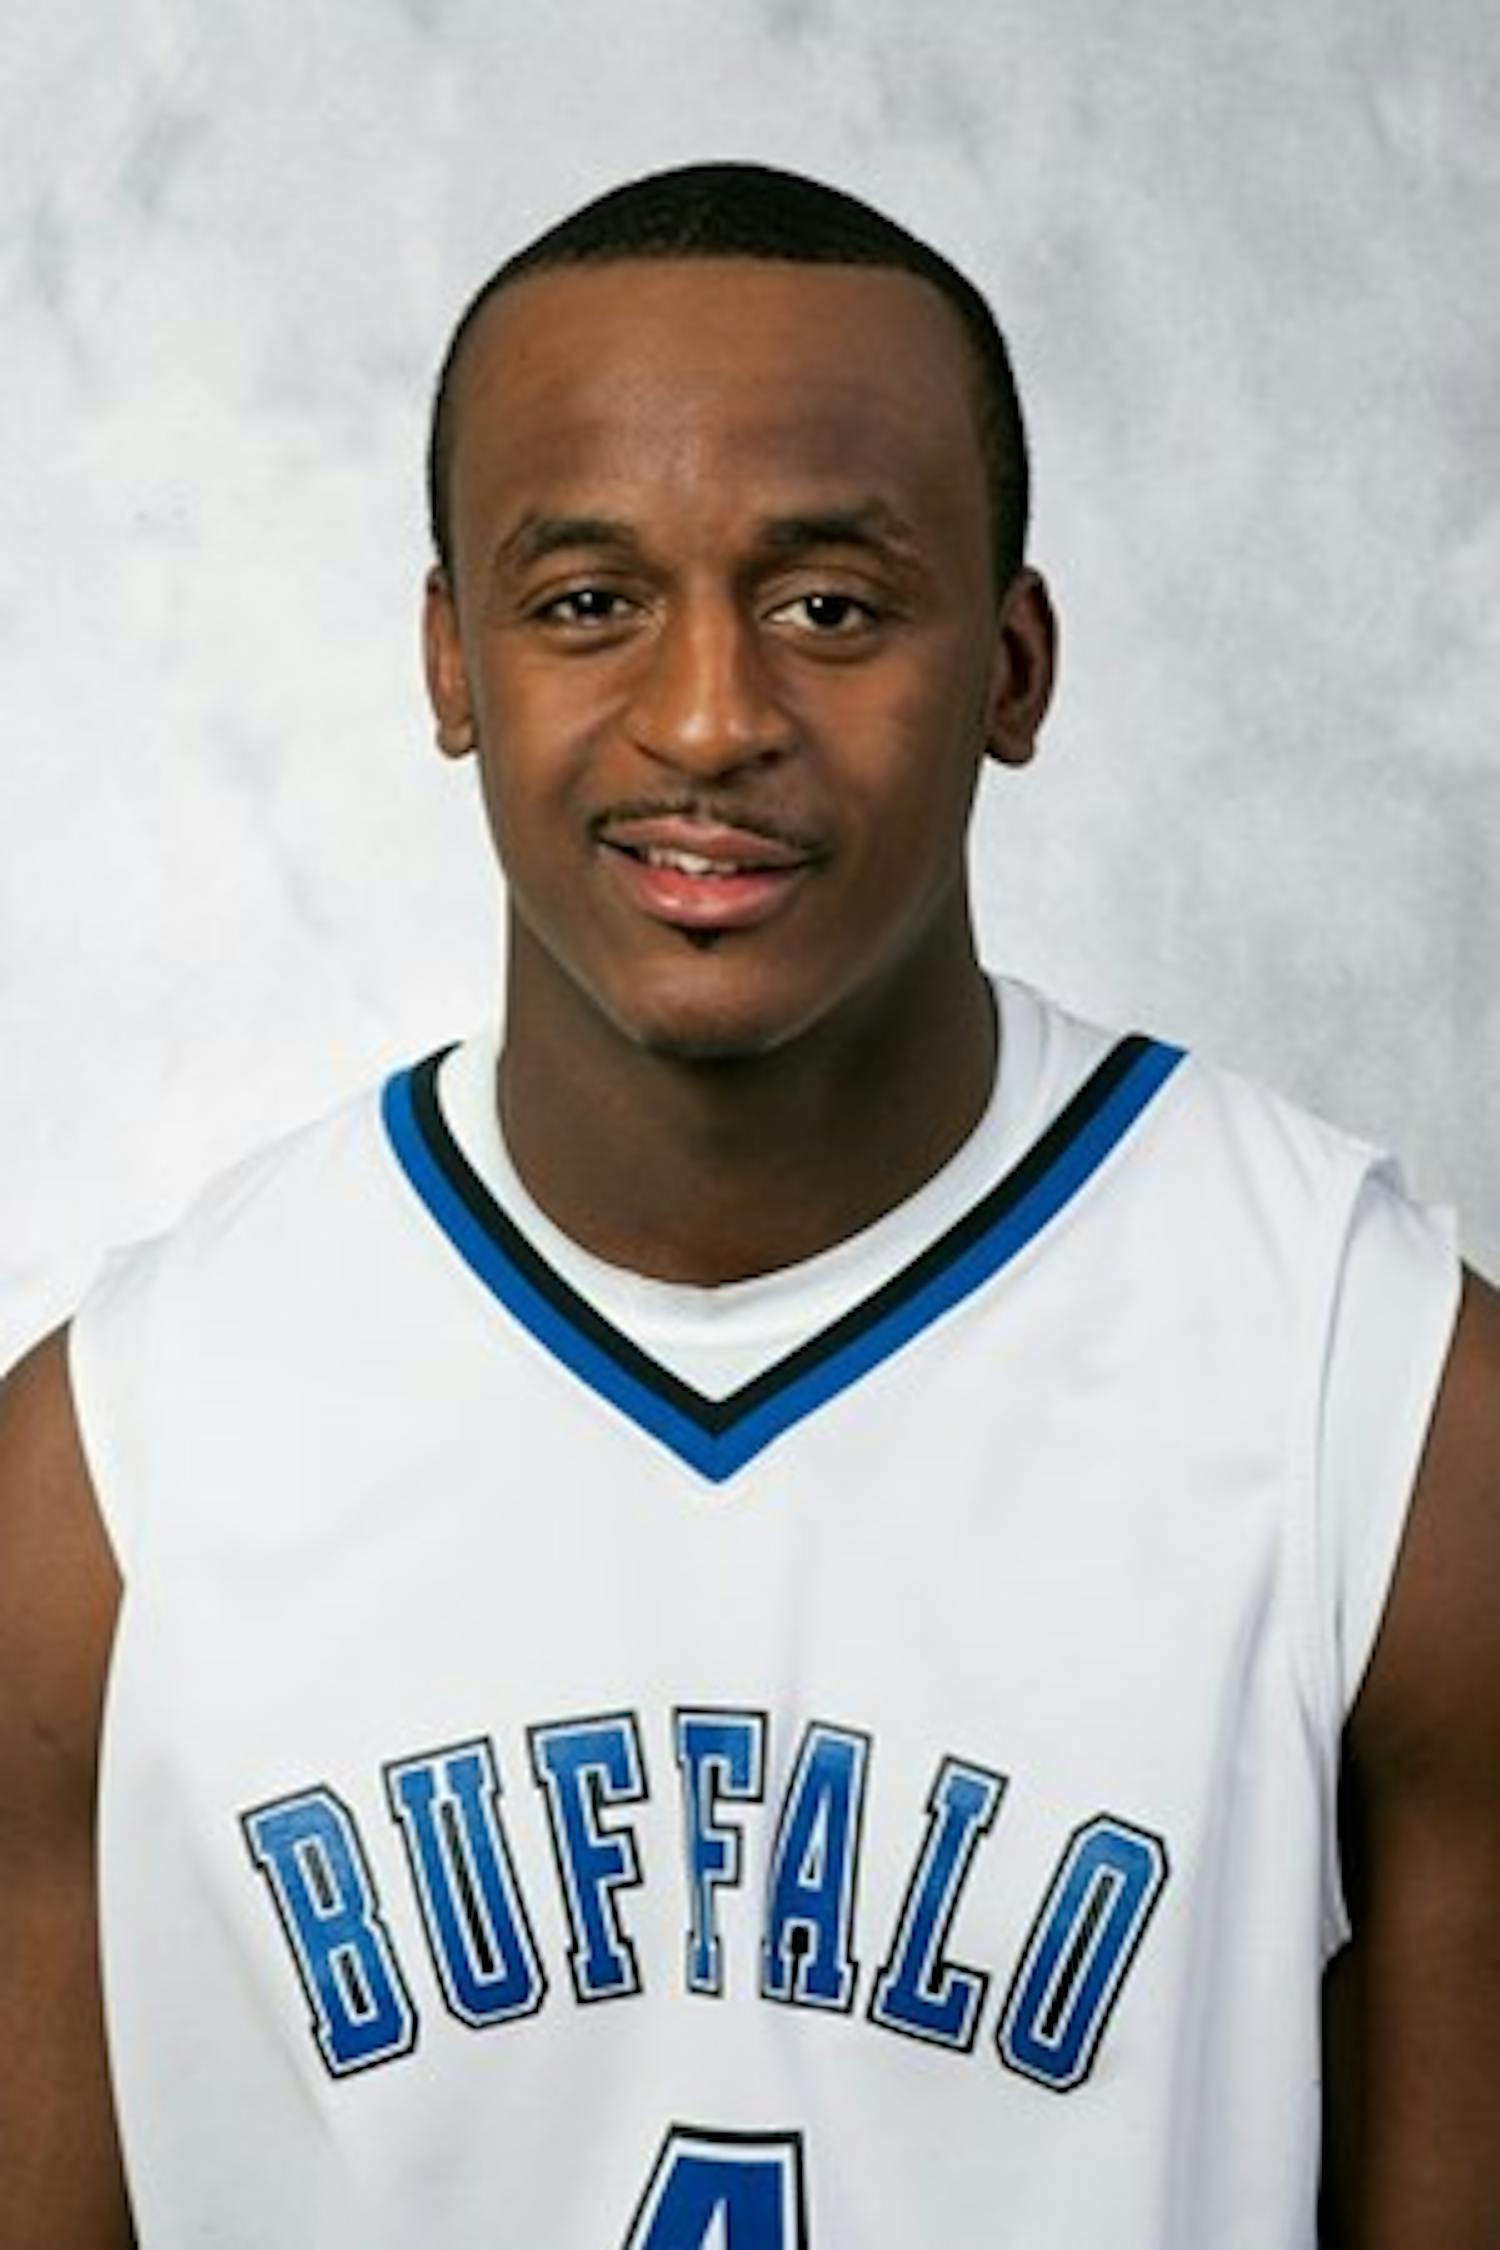 Rodney Pierce played for the Bulls men’s basketball team from 2007-2010, averaging 18.4 points during his senior year.&nbsp;